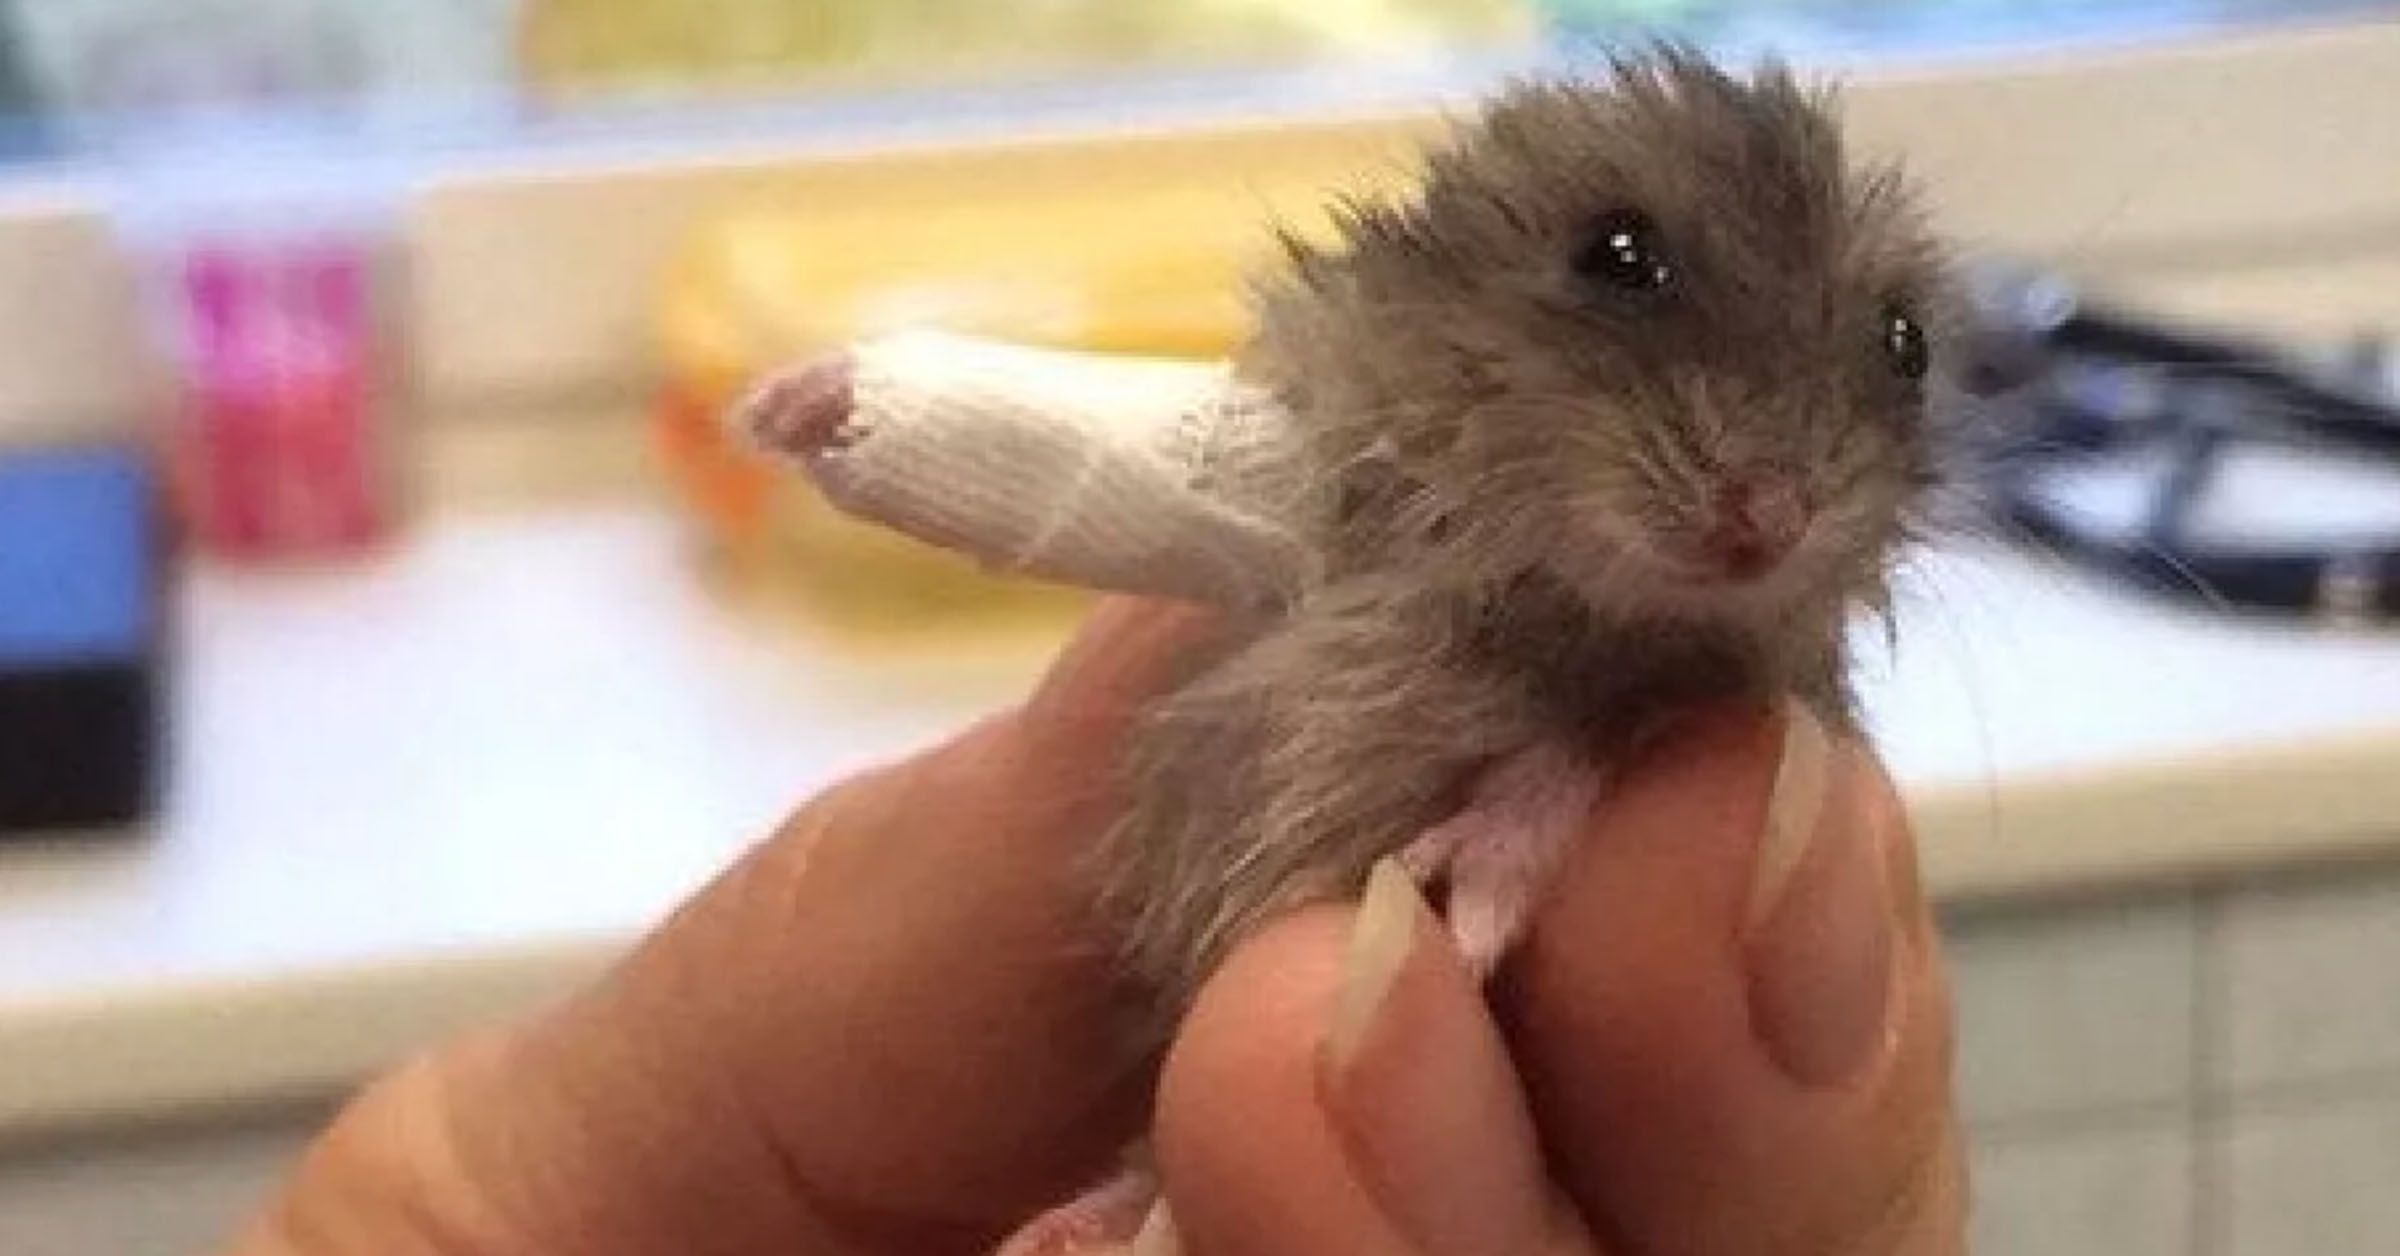 tiny-hamster-wears-a-tiny-cast-to-help-heal-his-broken-arm_featured.jpg.optimal.jpg